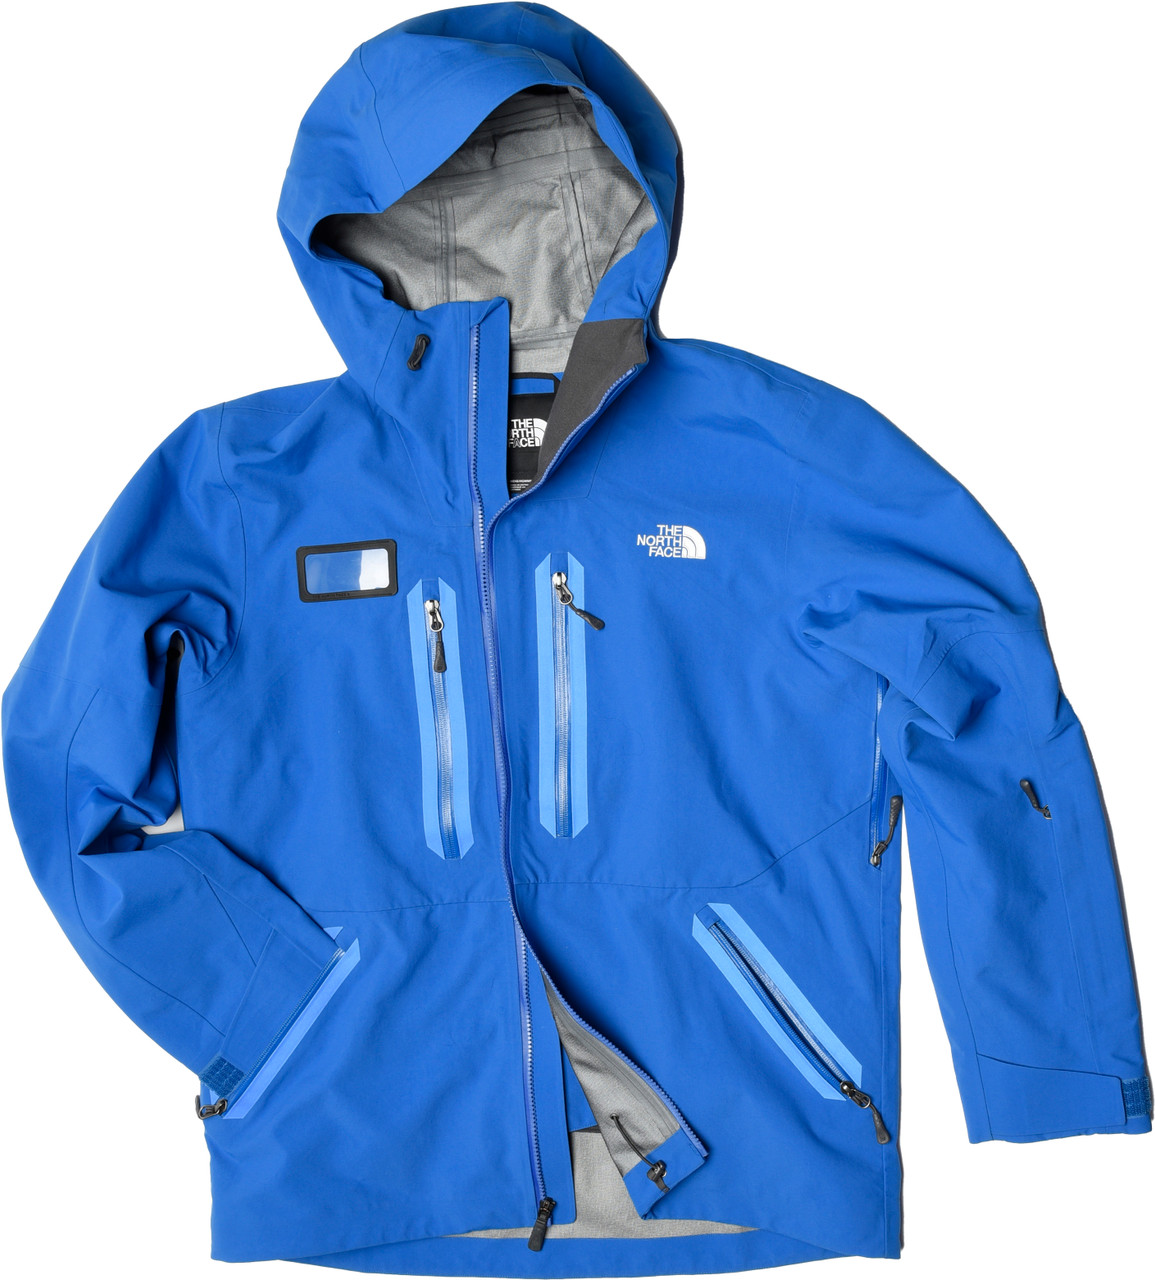 ED Staff - The North Face Mountain Pro Jacket - Men's - PSIA-AASI Shop